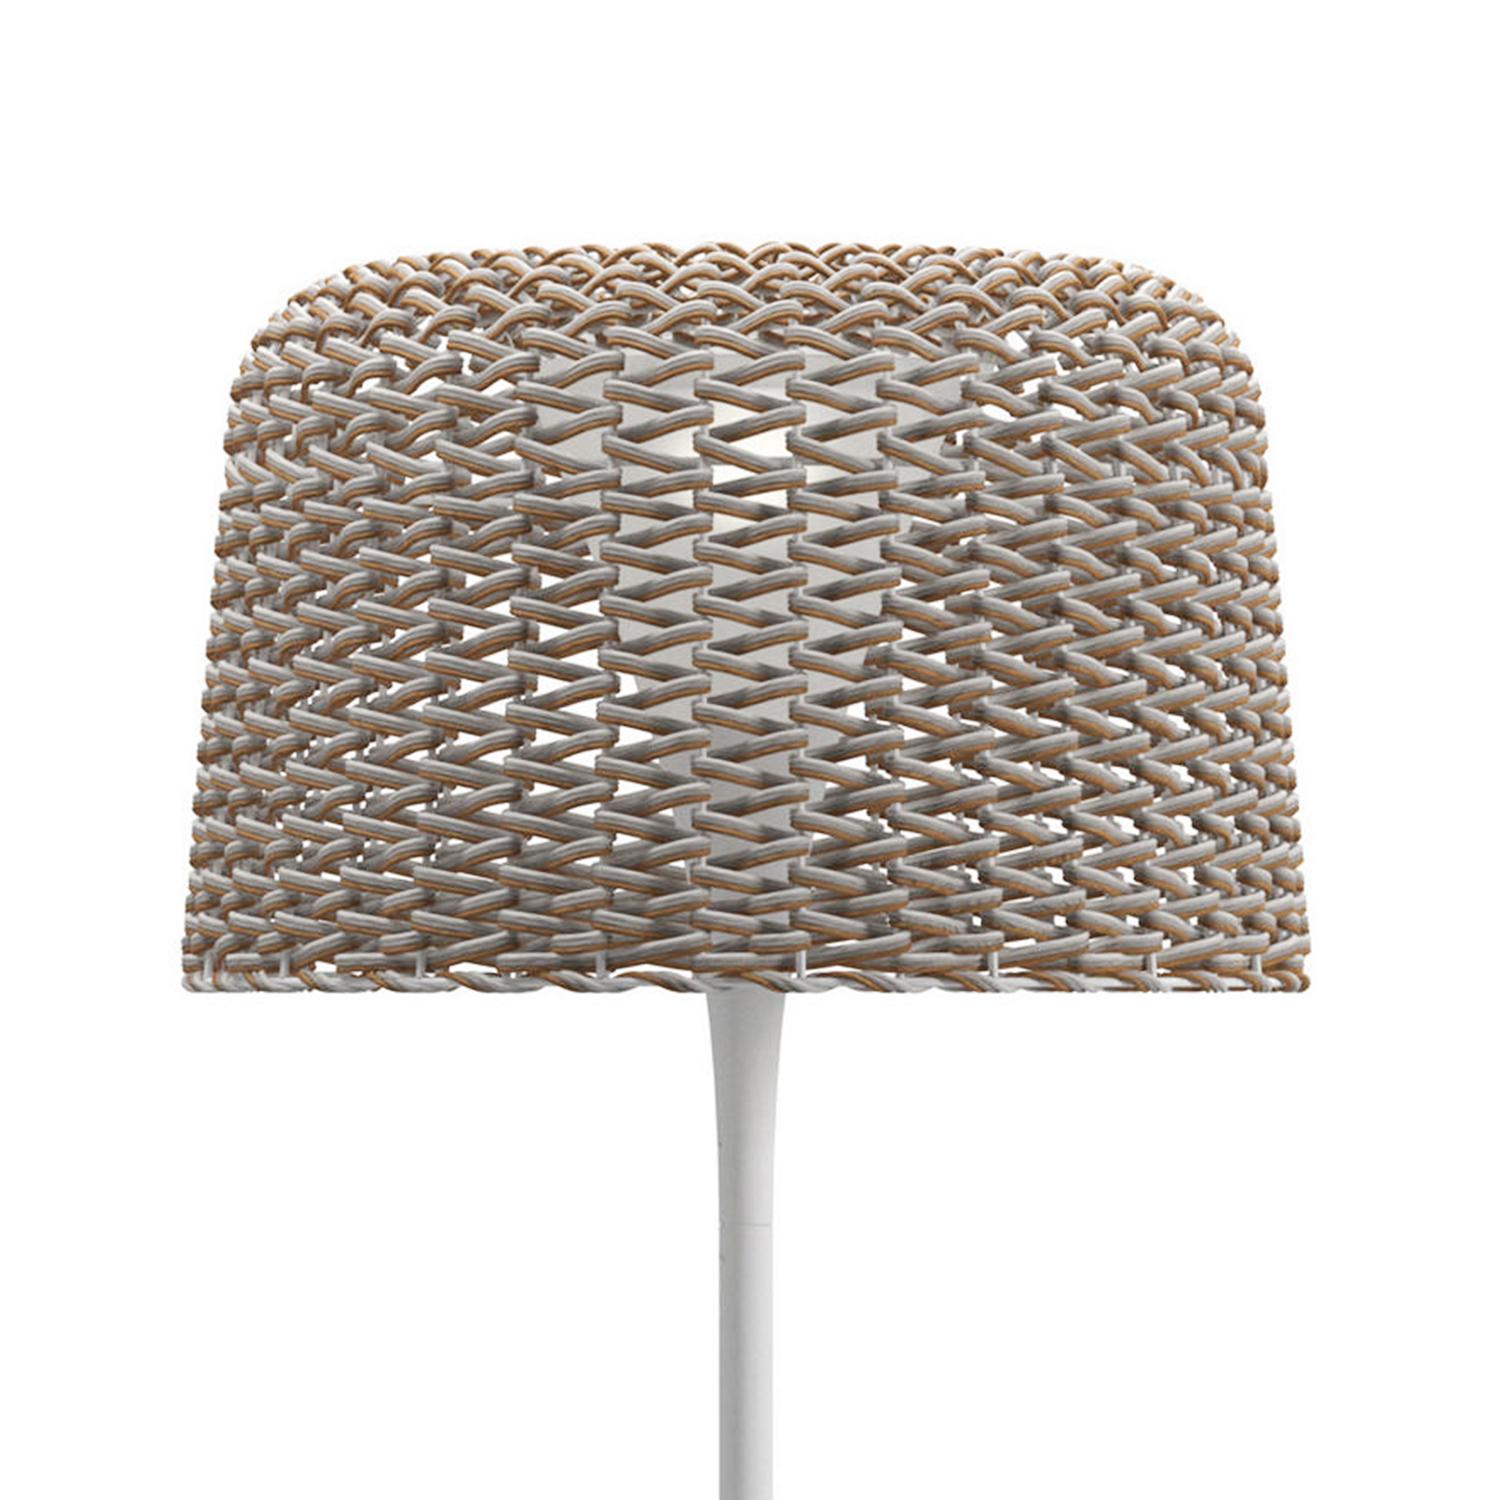 Floor Lamp Wicker Outdoor White with wicker outdoor woven
lampshade in dbrown finish, with aluminium white powder-coated
structure and teak trim on base edge. With solar and mains power 
rechargable LED light unit. Adaptor Output 4.2V. 65ft range